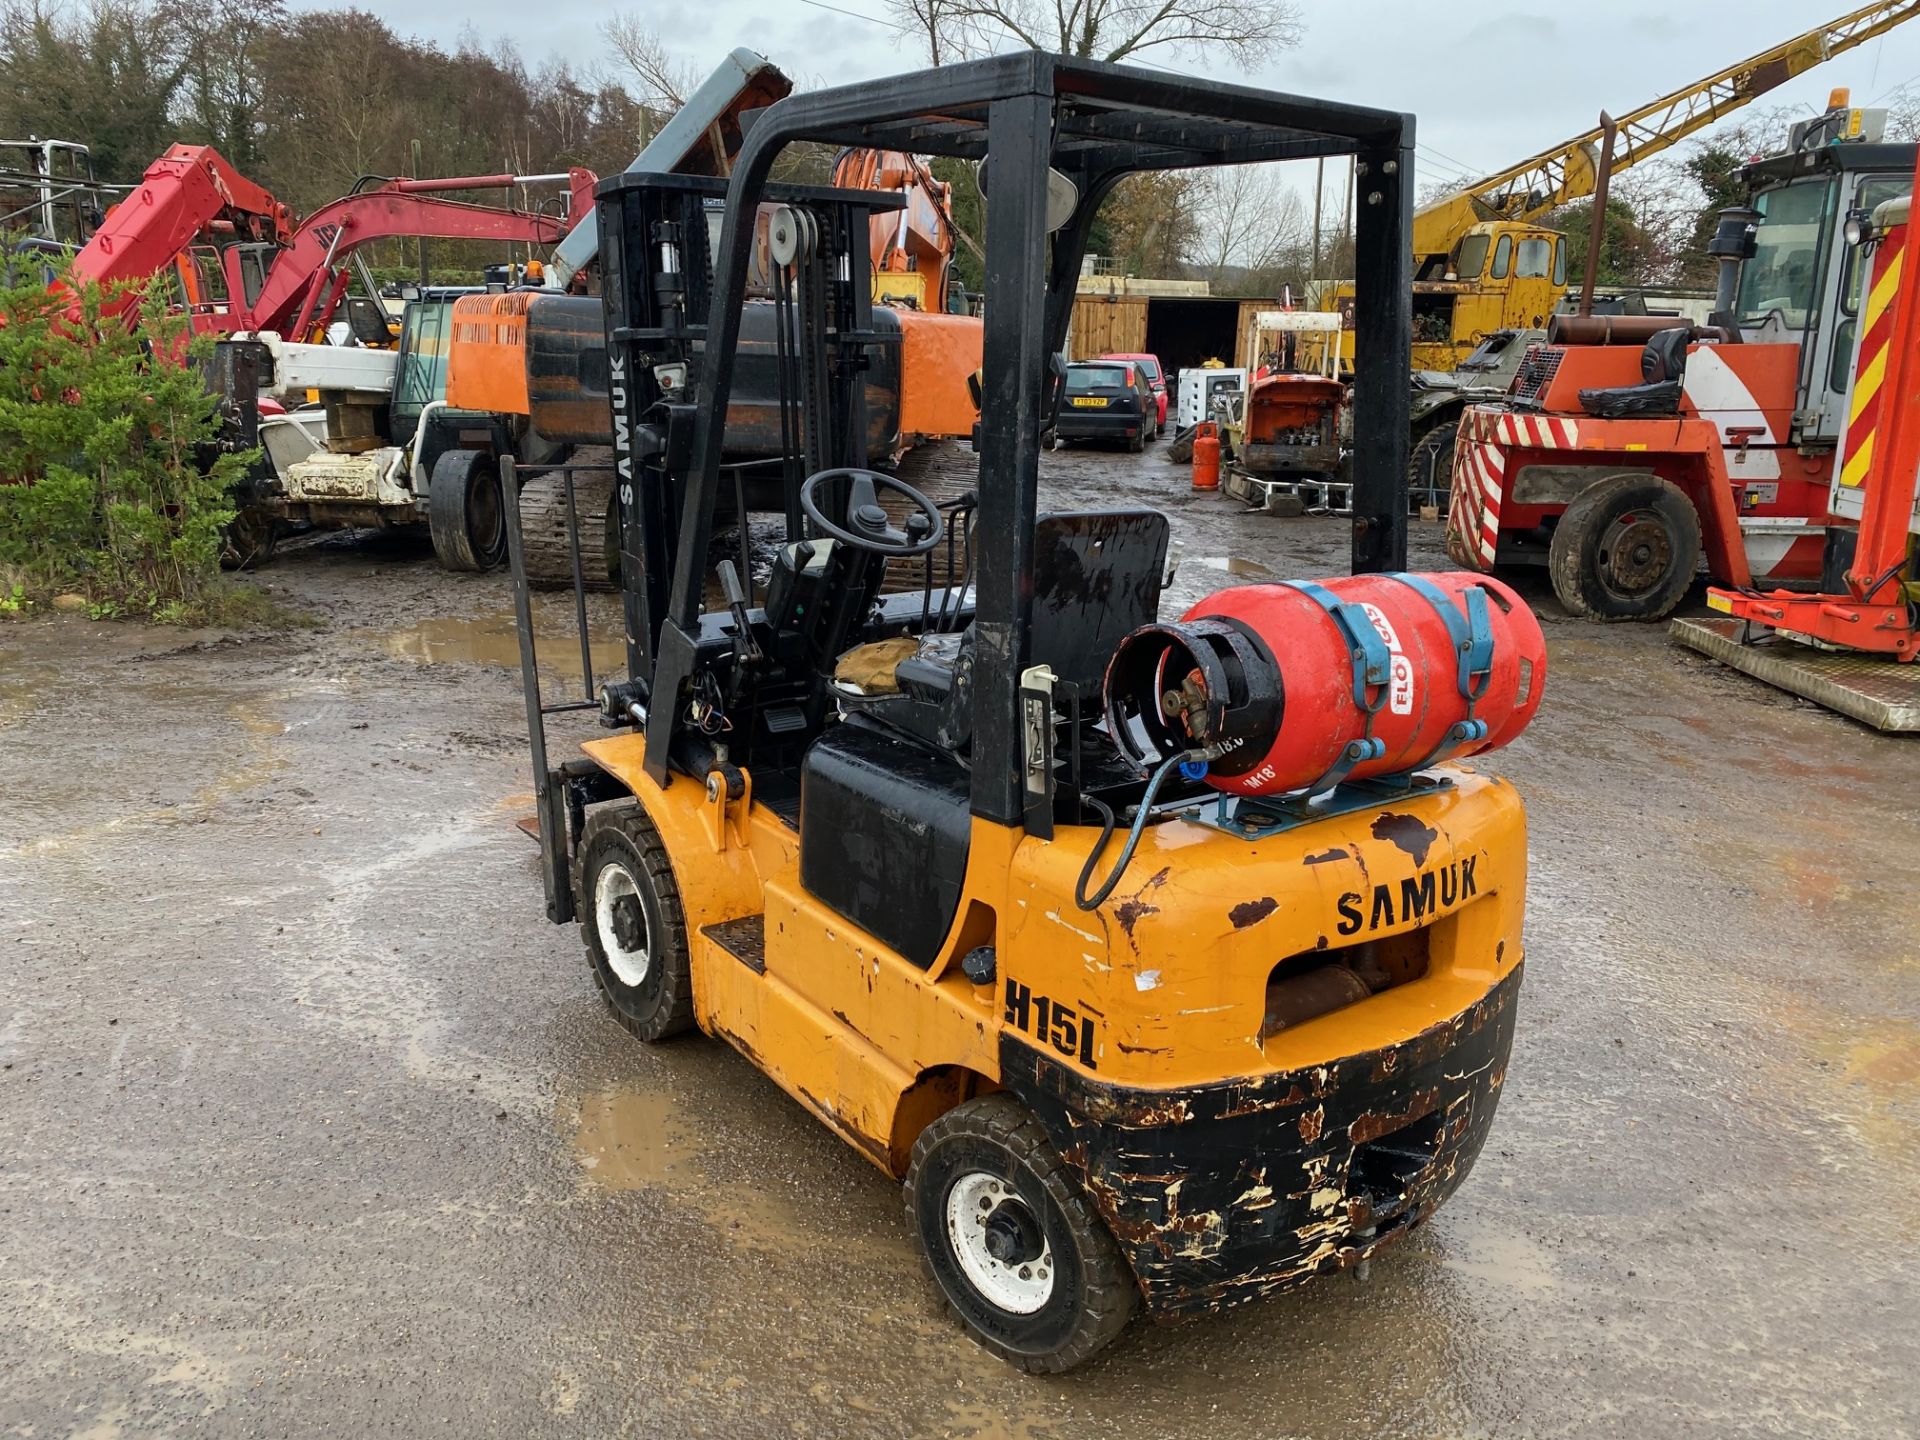 Samuk gas forklift, side shift, nearly new tyres all round, runs lovely *PLUS VAT* - Image 4 of 6